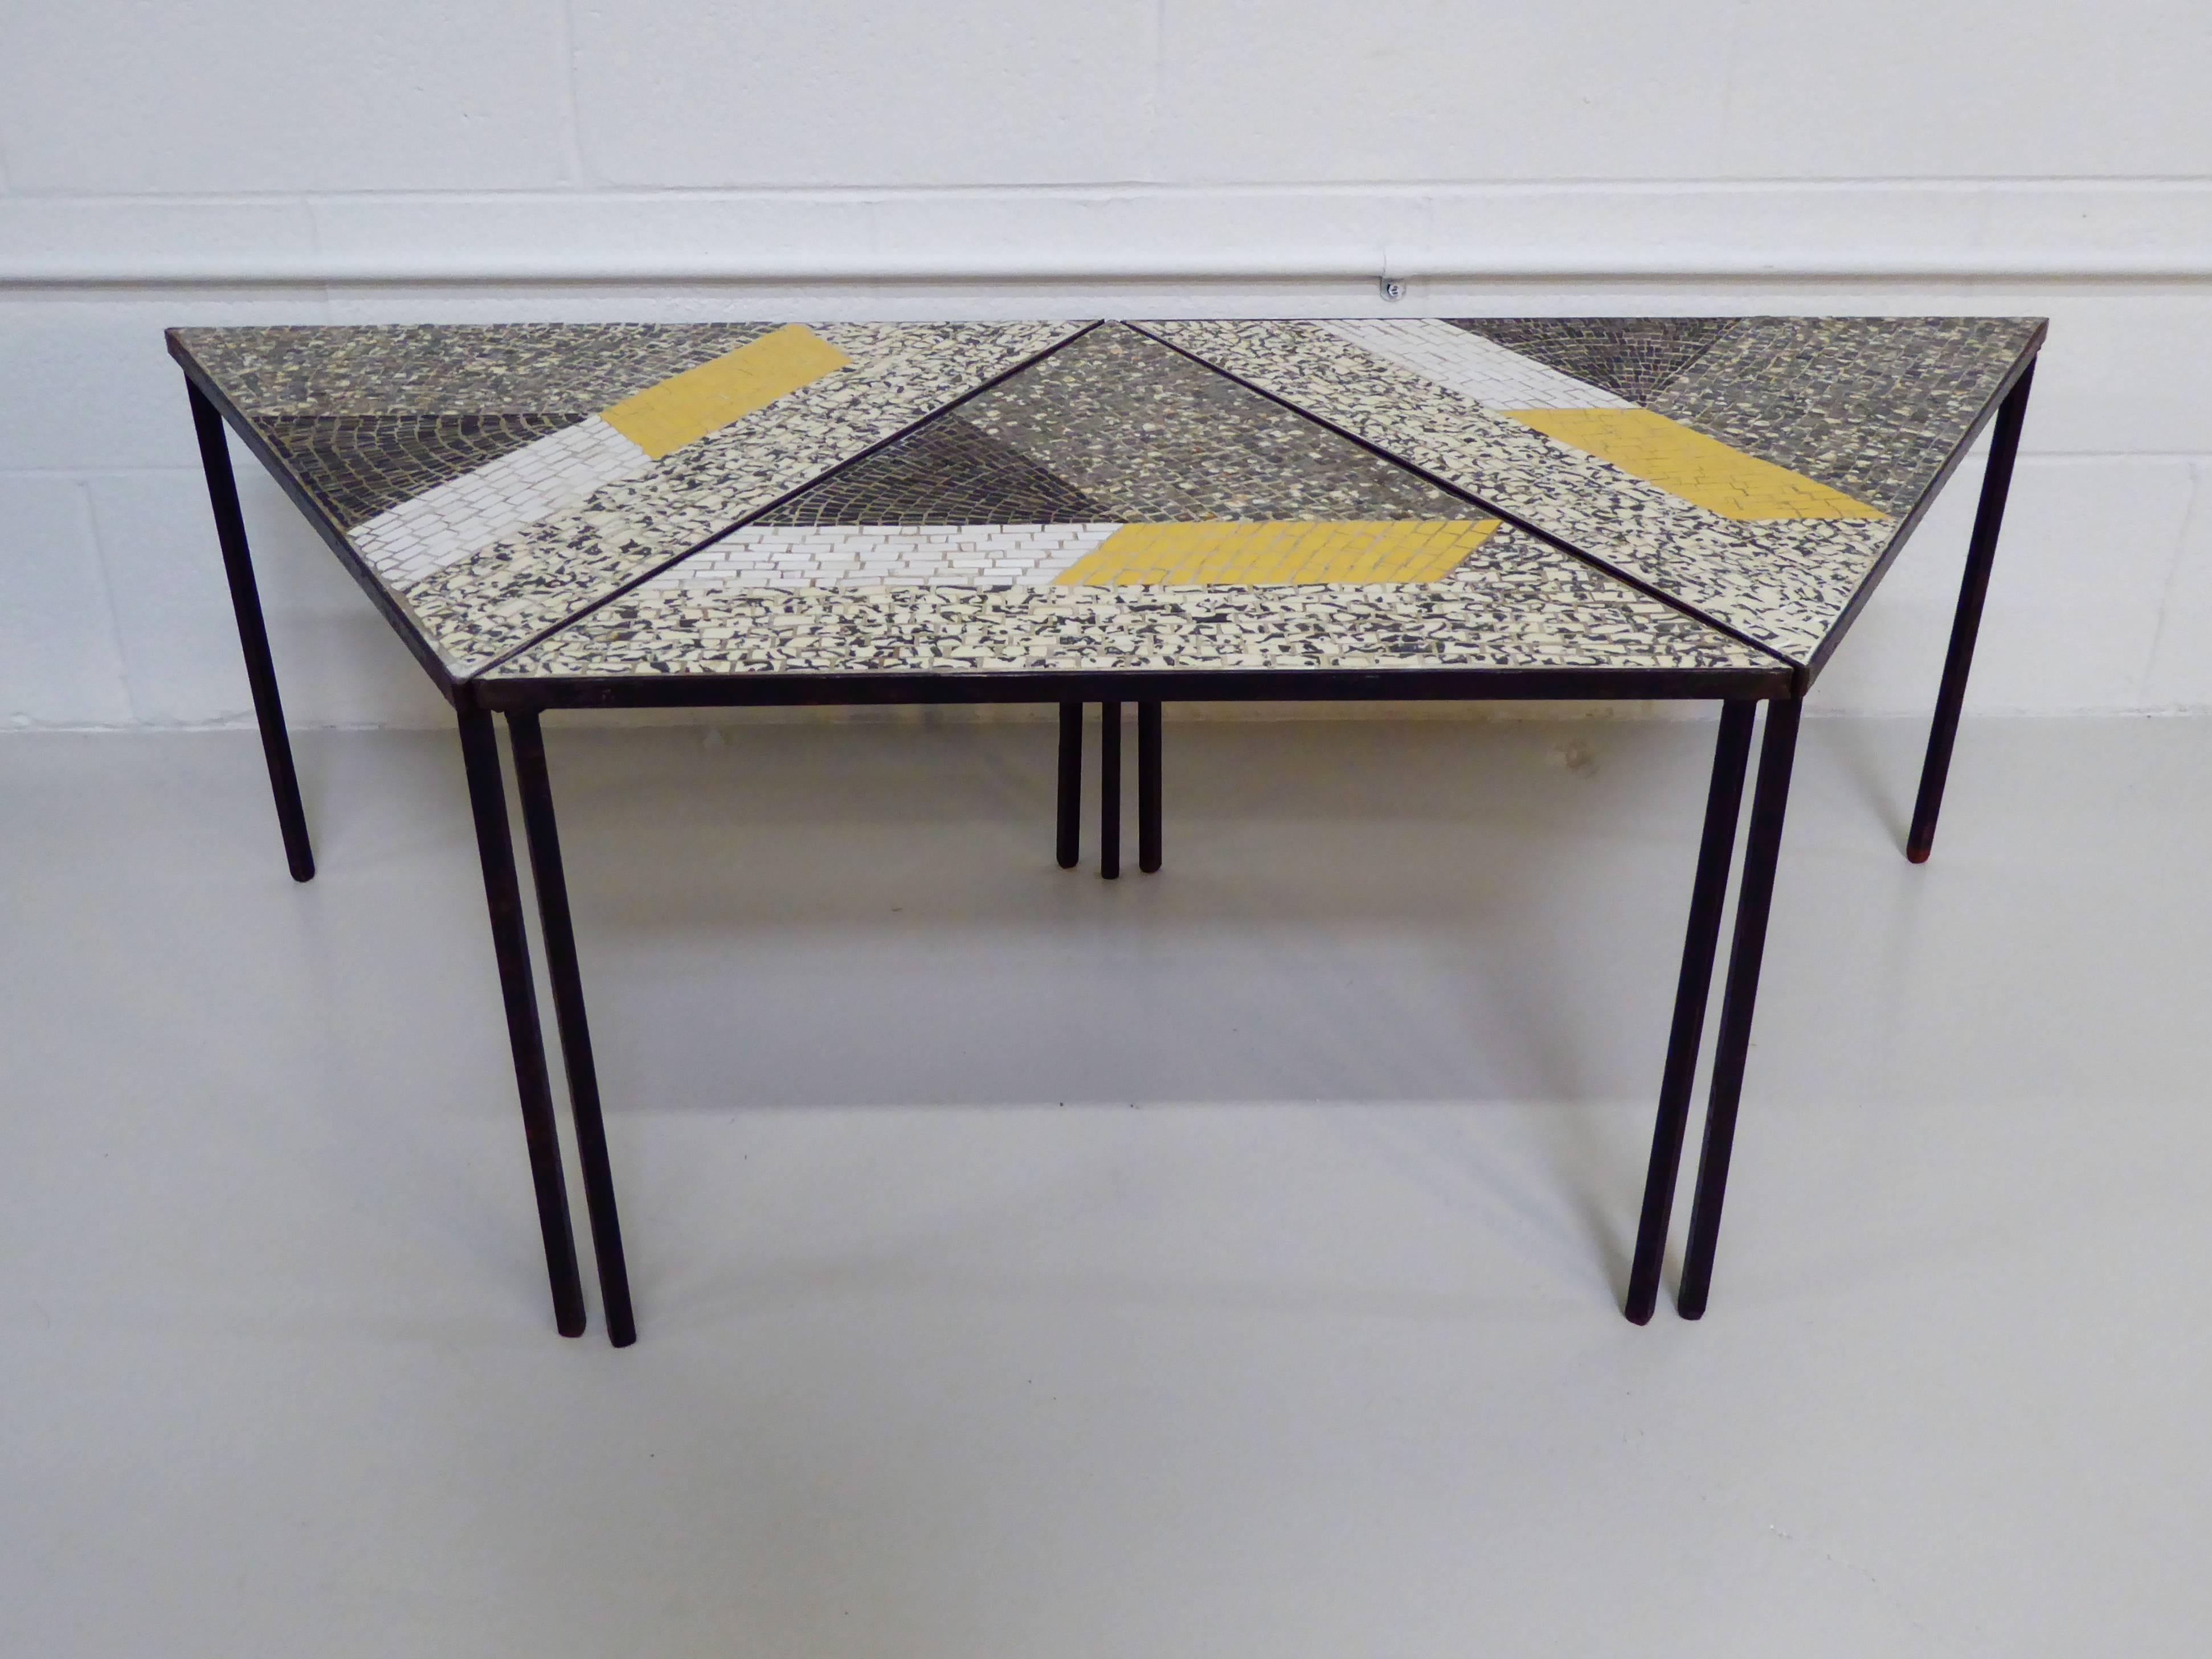 Set of Three Handcrafted Italian Mosaic Tile Tables In Excellent Condition For Sale In Northbrook, IL